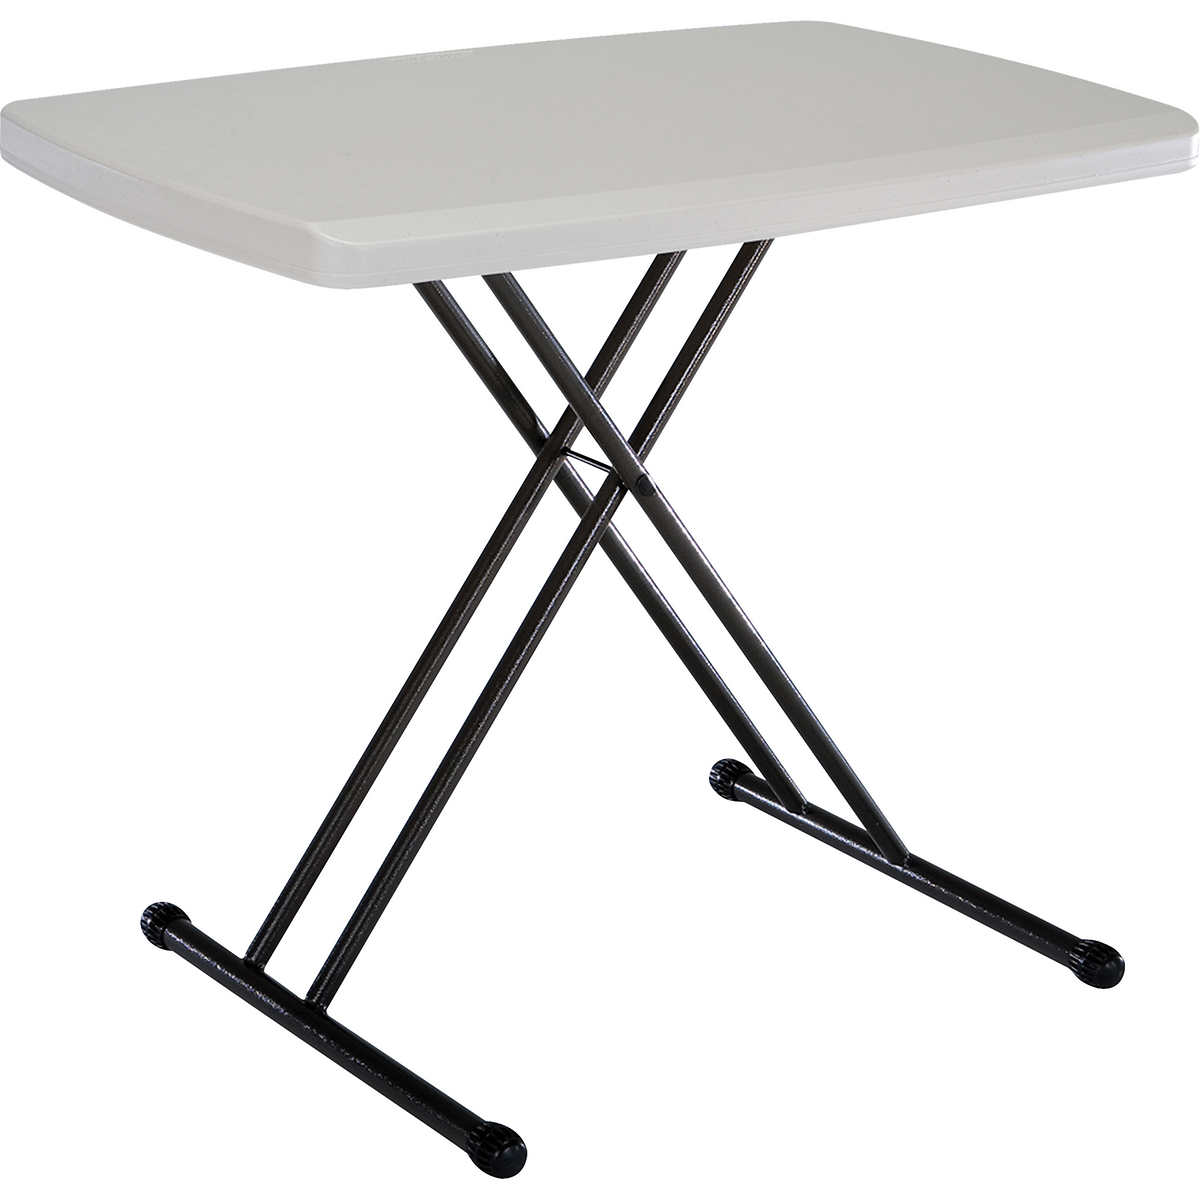 Personal Folding Table, Lifetime Round Tables Costco